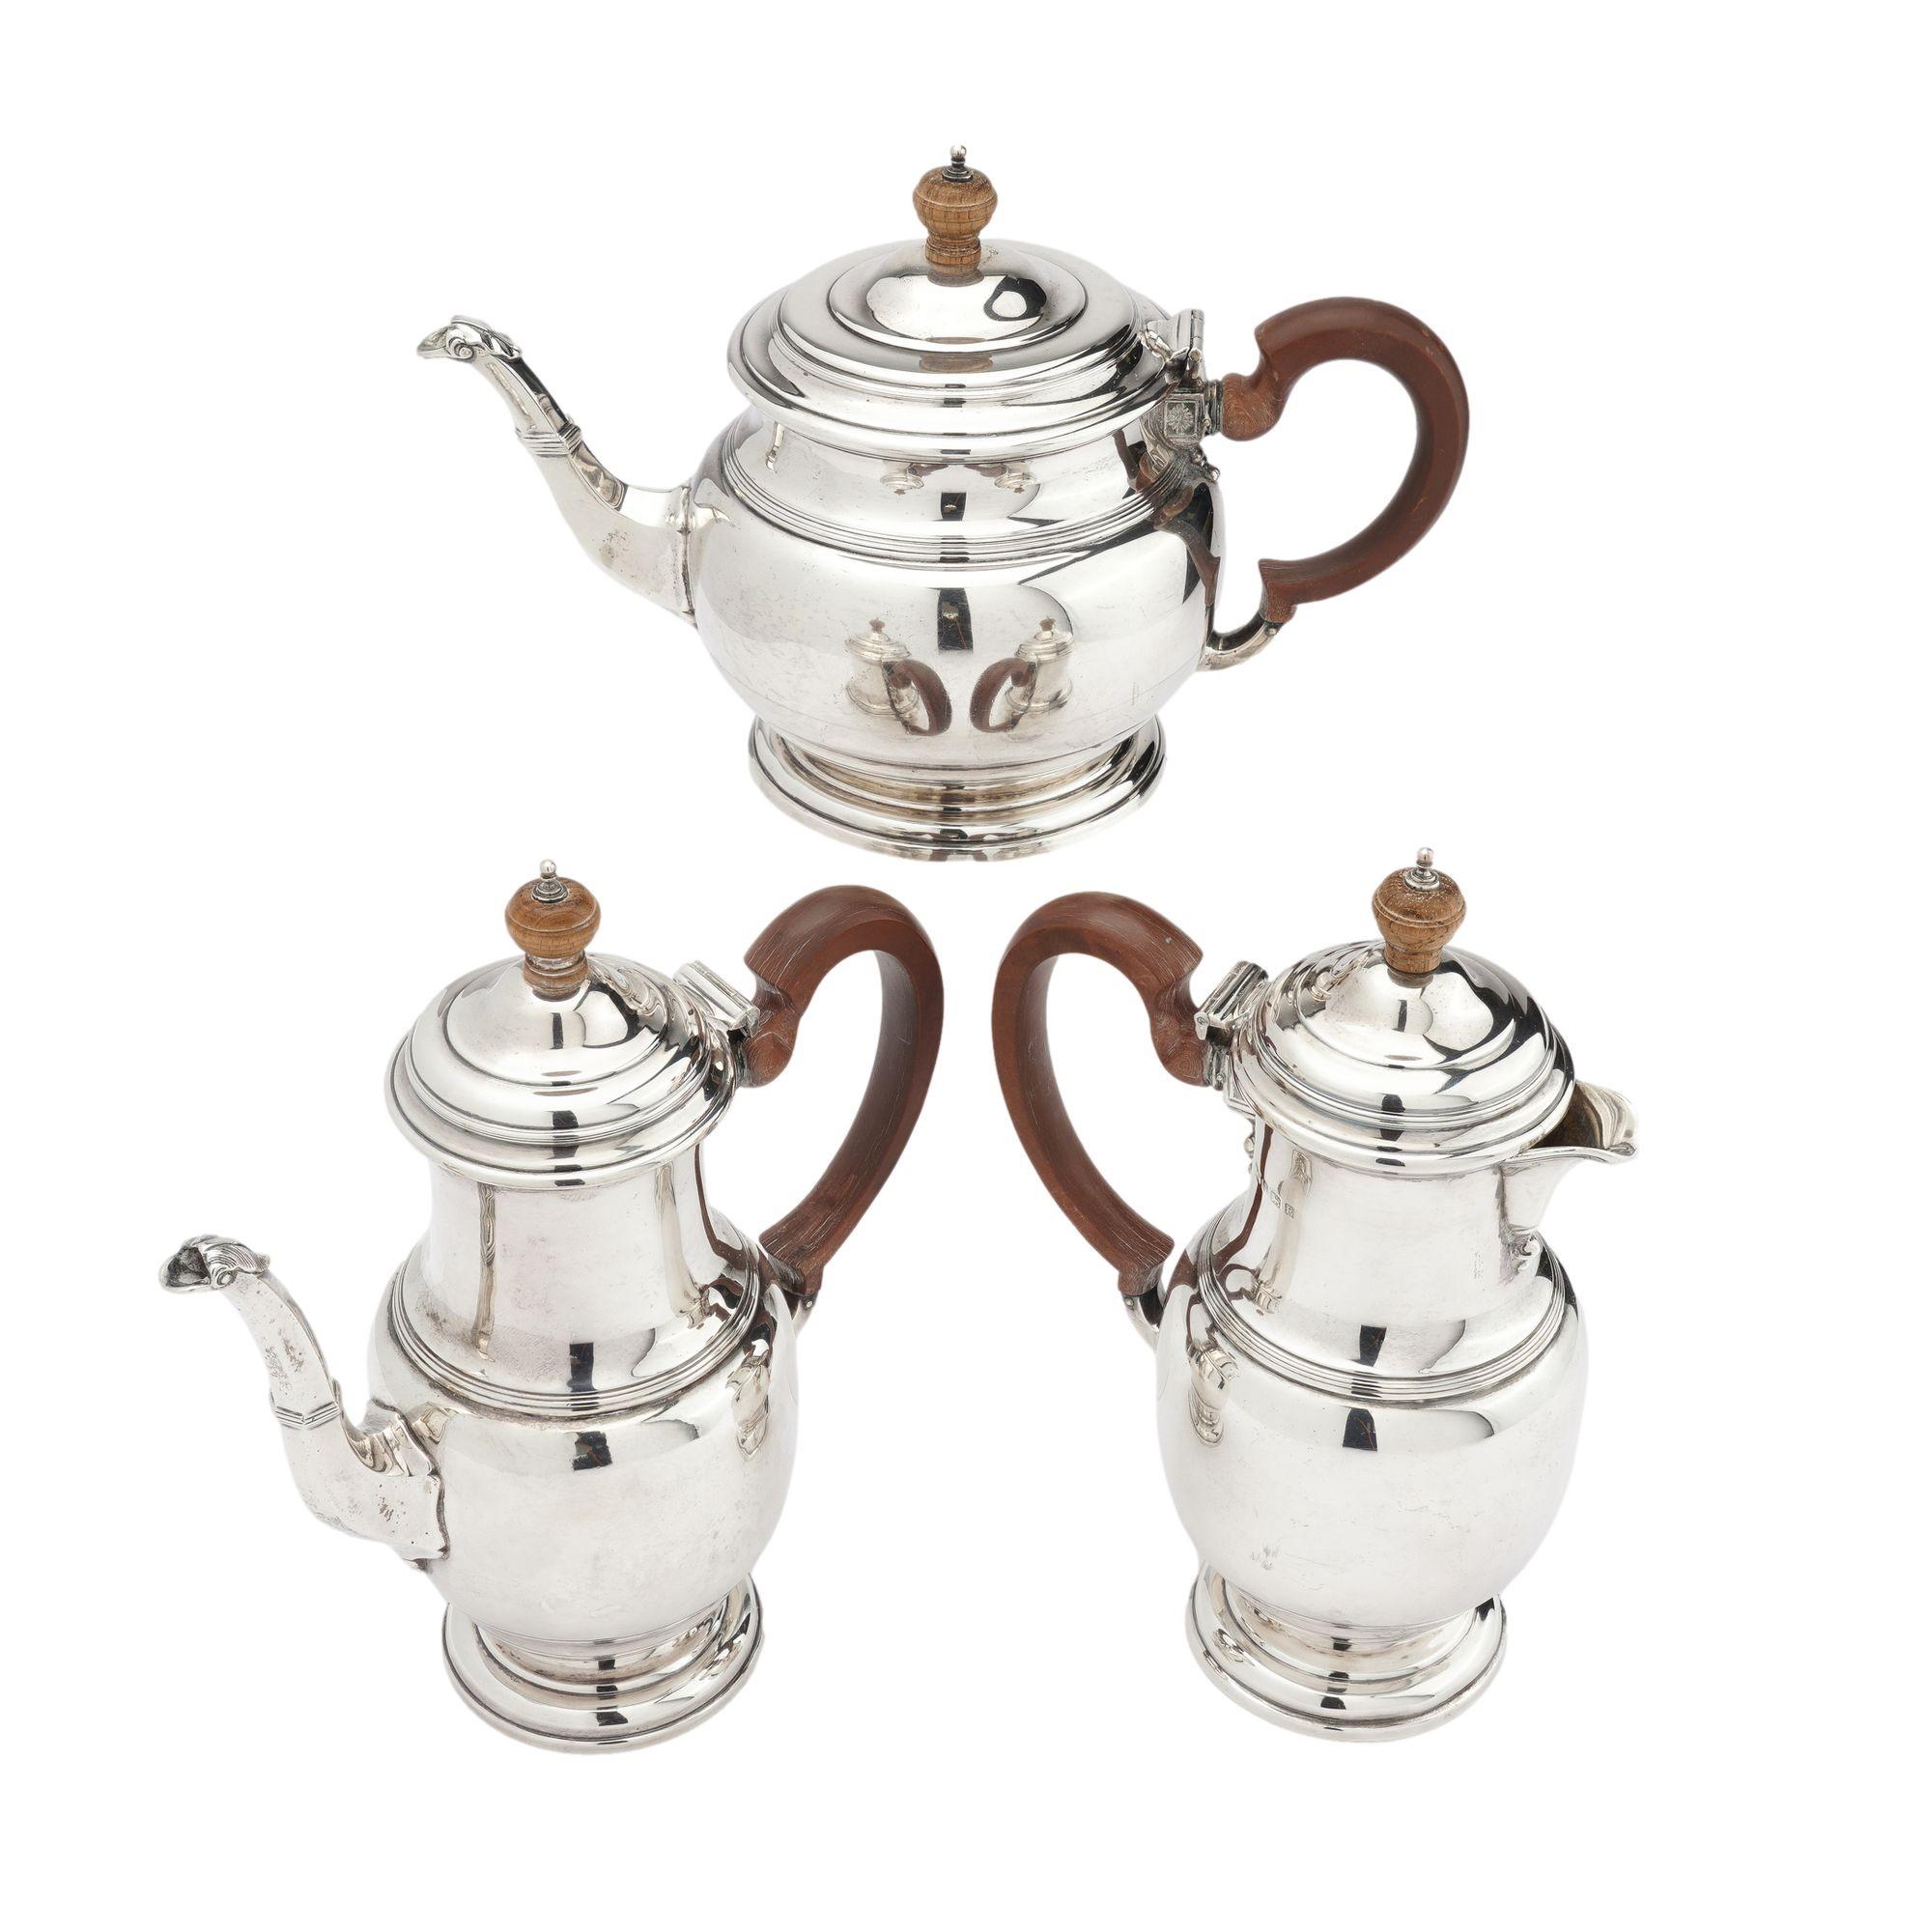 Three piece sterling silver coffee/tea service with a hot water pot. All vessels have carved wood handles and carved wood lid finials. Fine original condition.
Stamped on the underside: Mapin & Webb Ltd
London, England, 1929.

Dimensions: Water Pot: